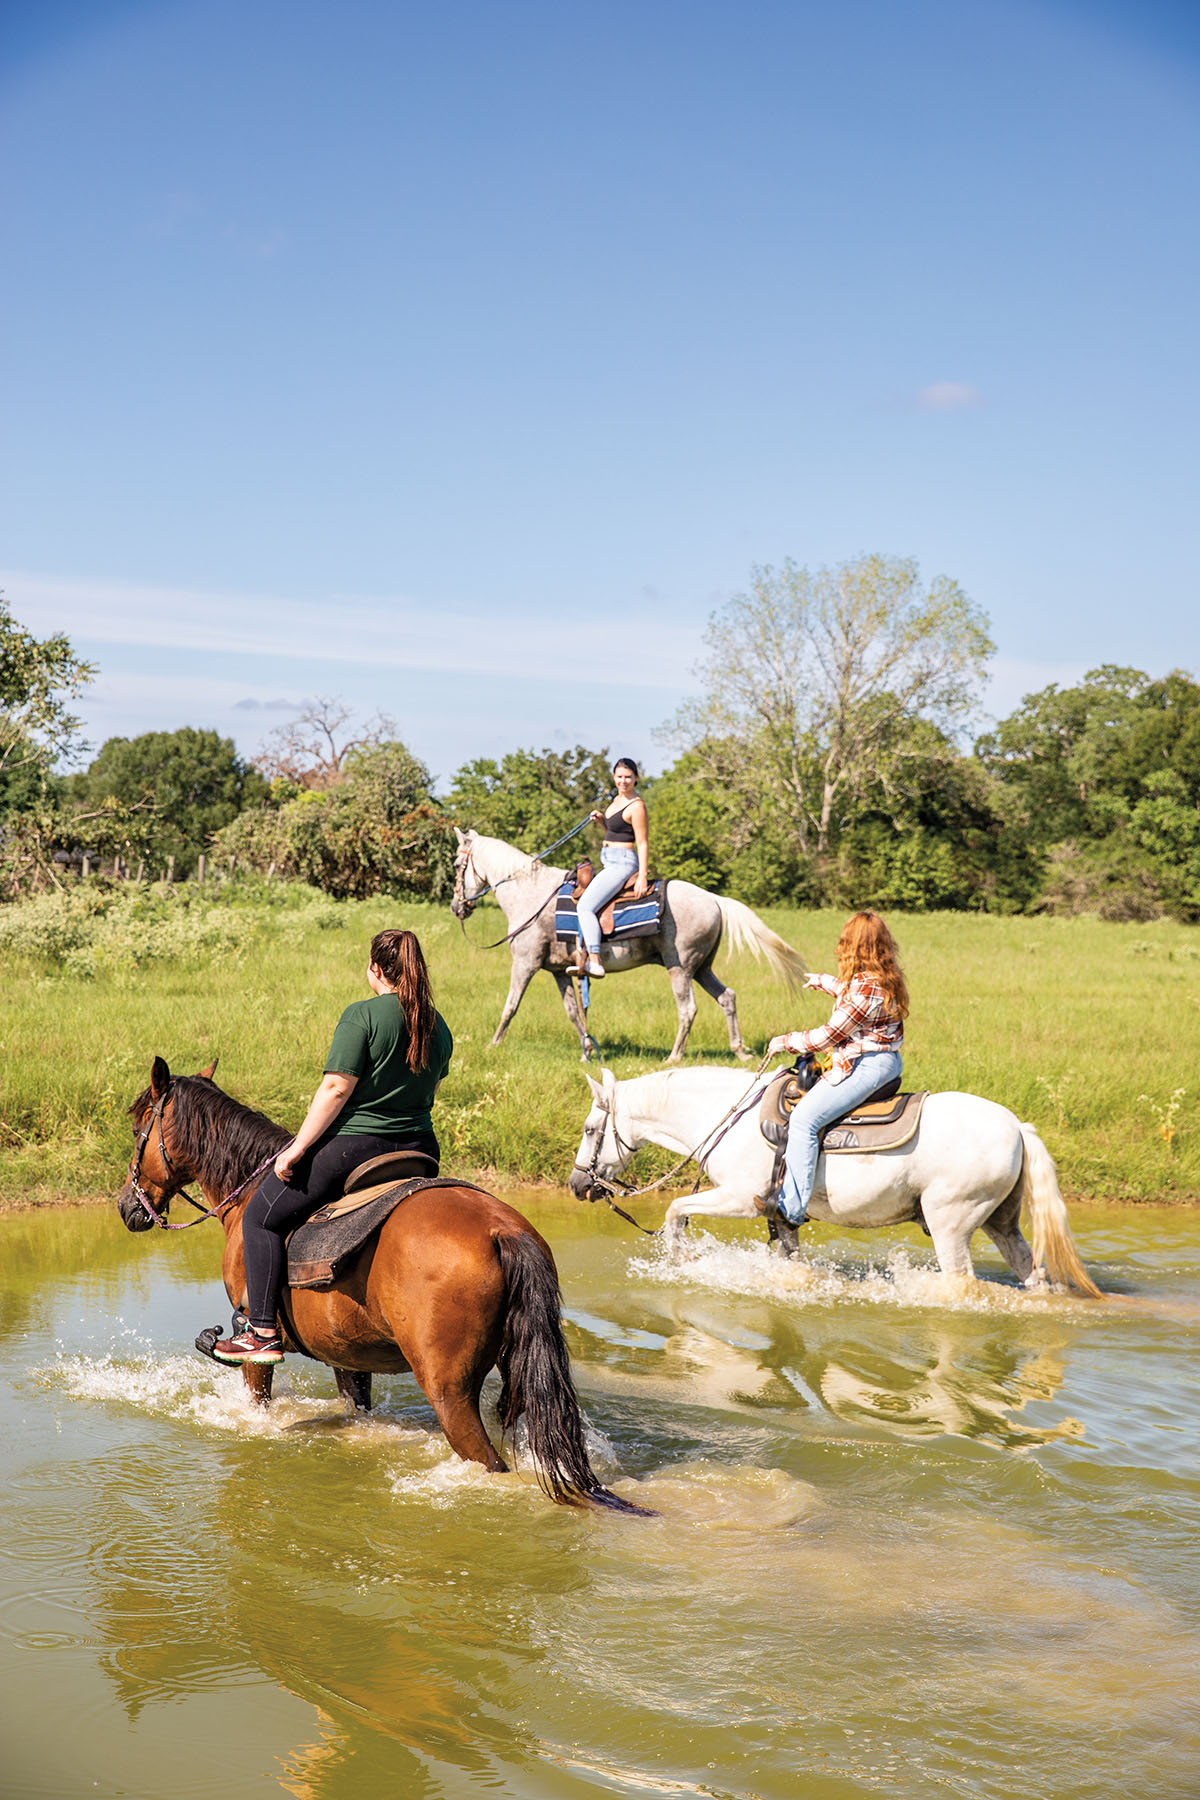 Three people ride horses on an open pasture and through water